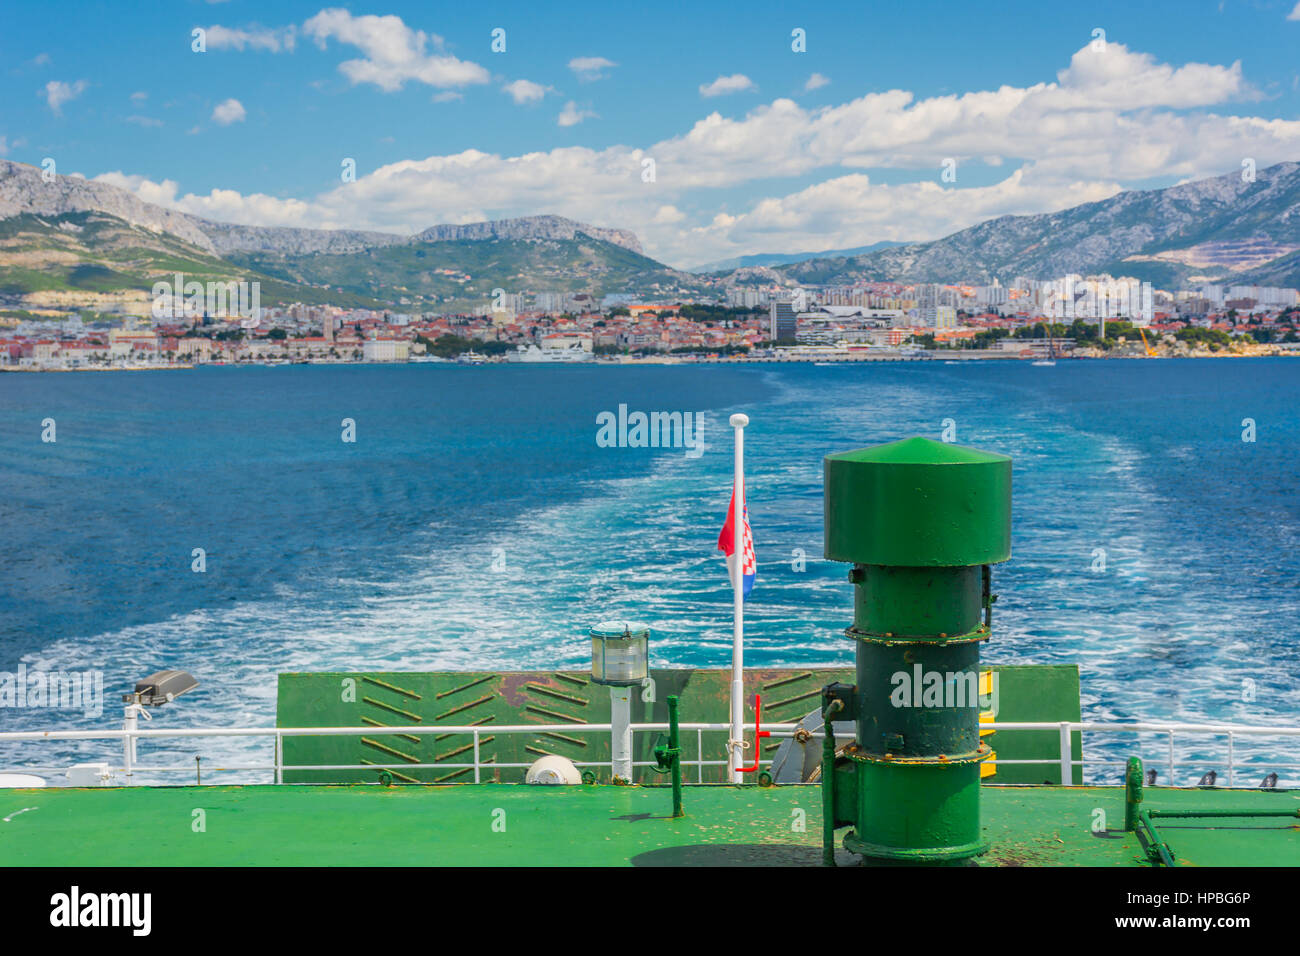 Seafront view from ferry at coastline of town Split, Croatia. Stock Photo